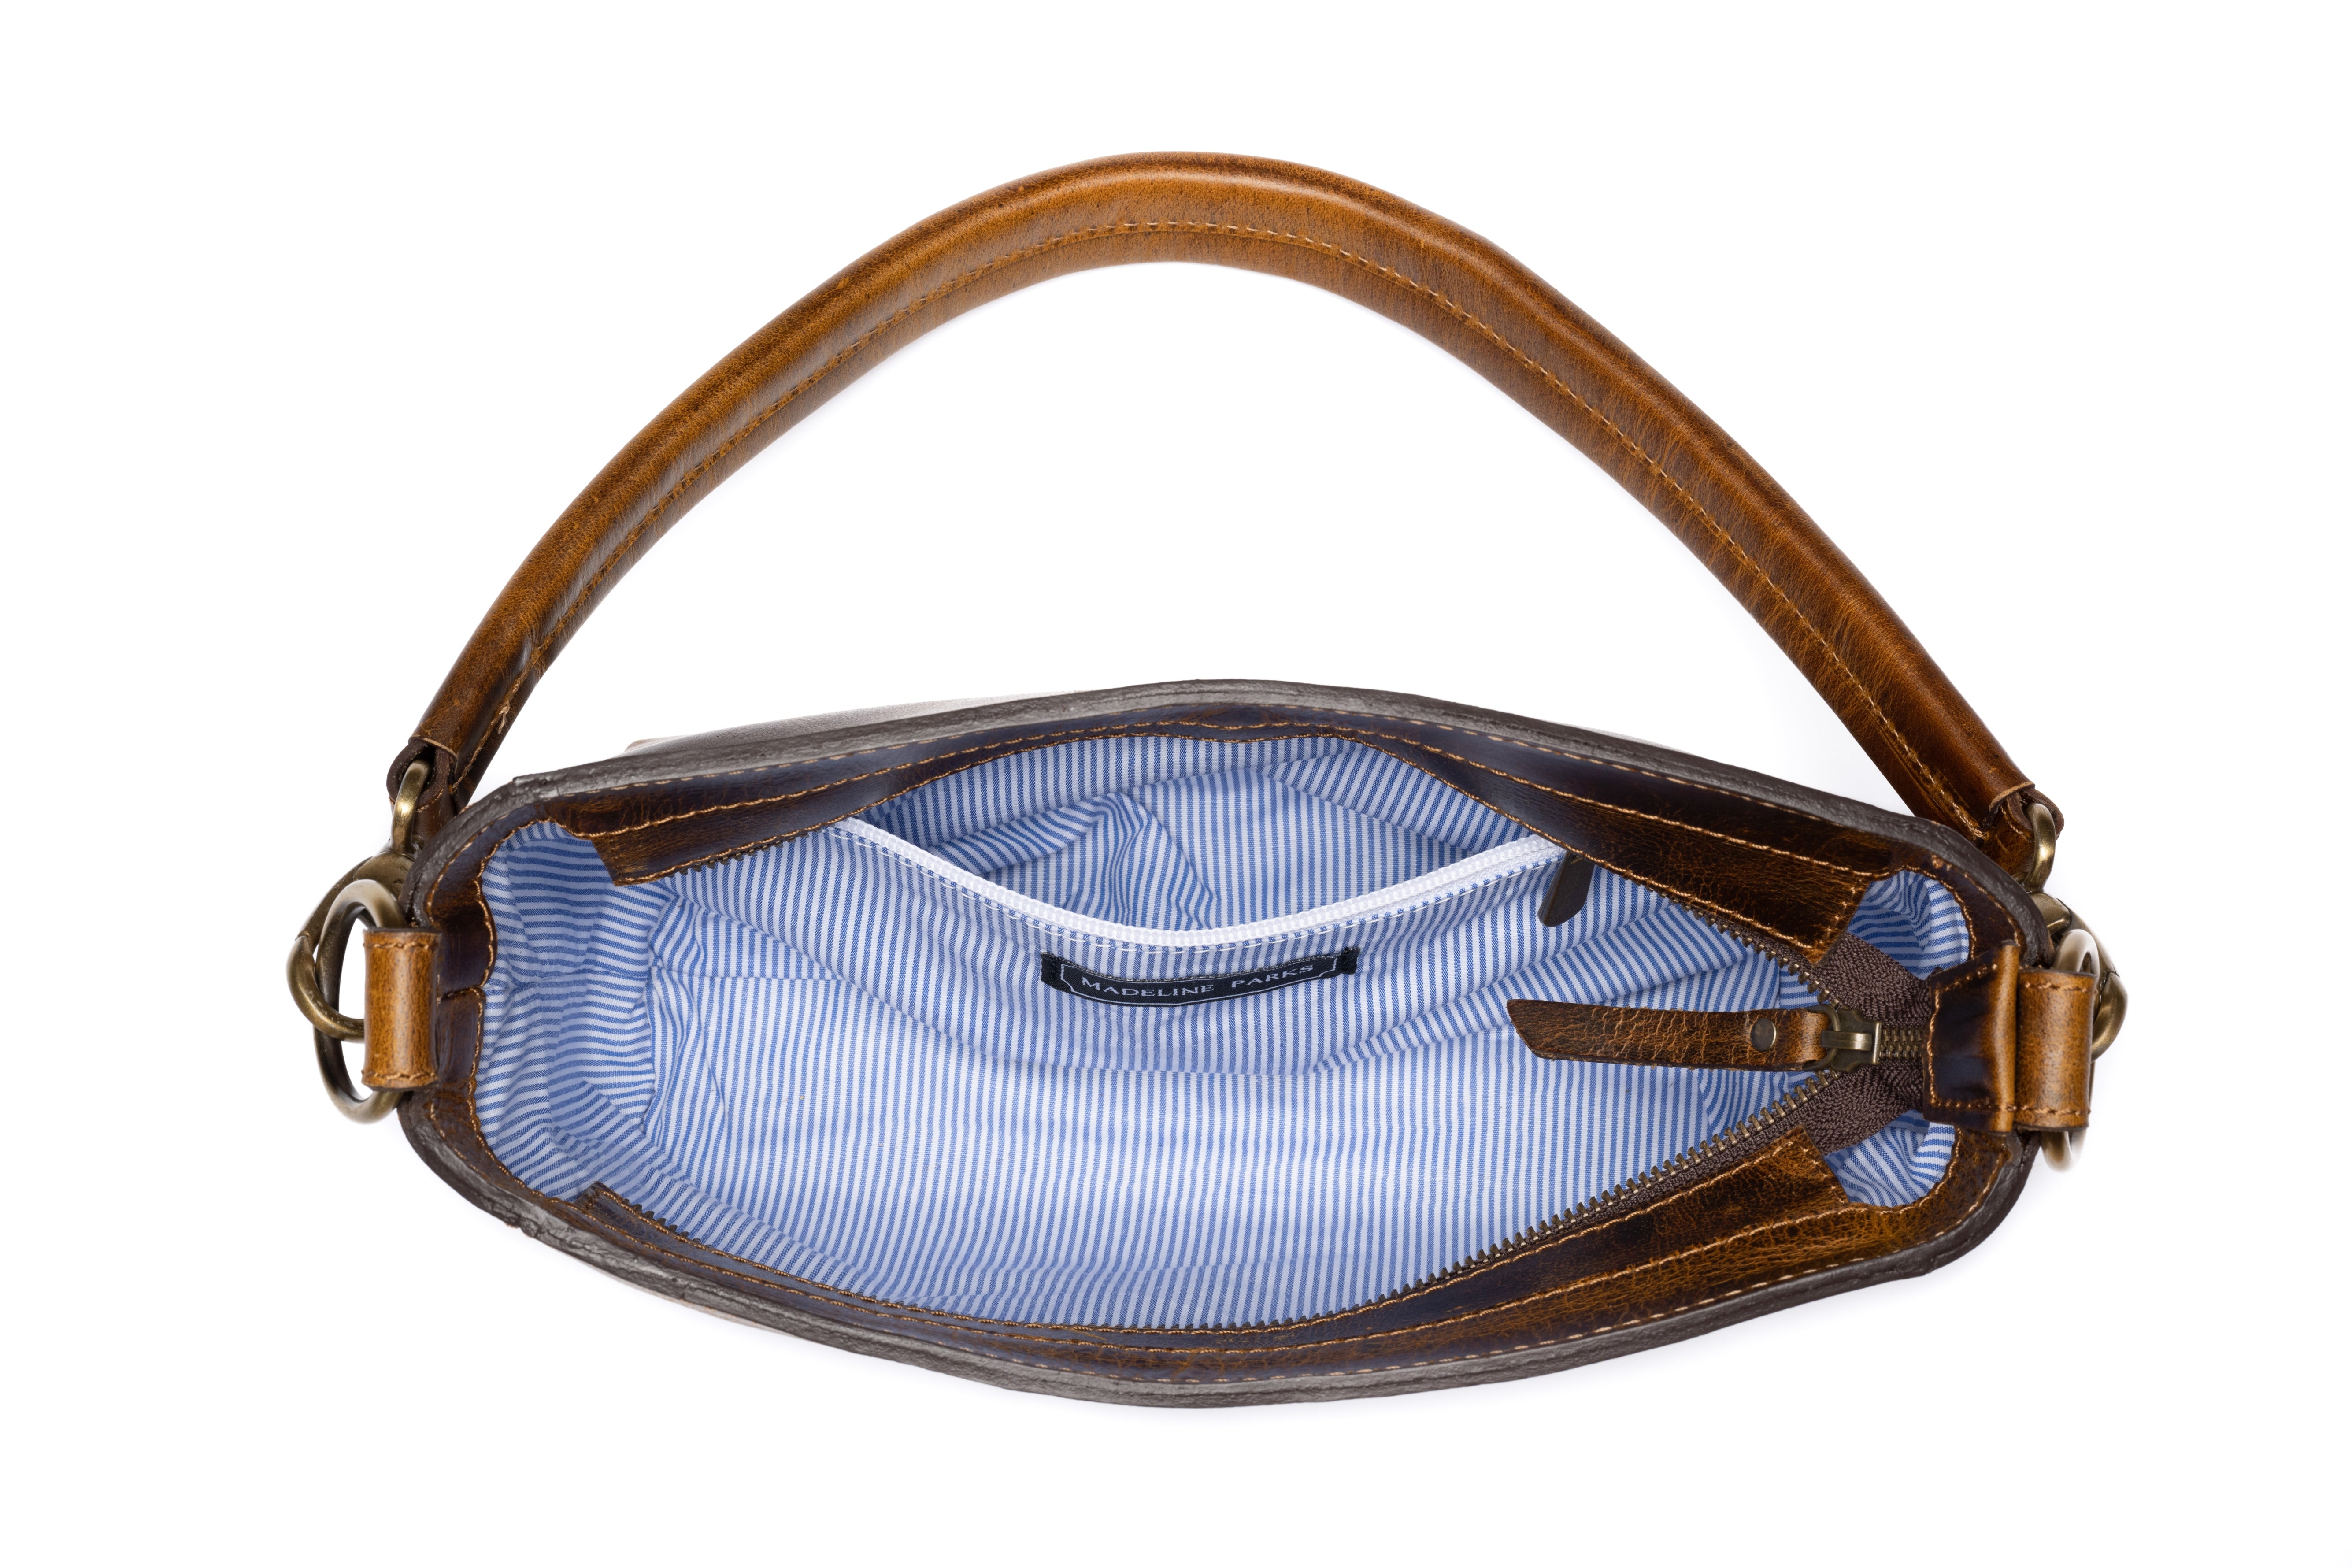 Top view showing inside a  Stylish leather purse with blue and white fabric lining.